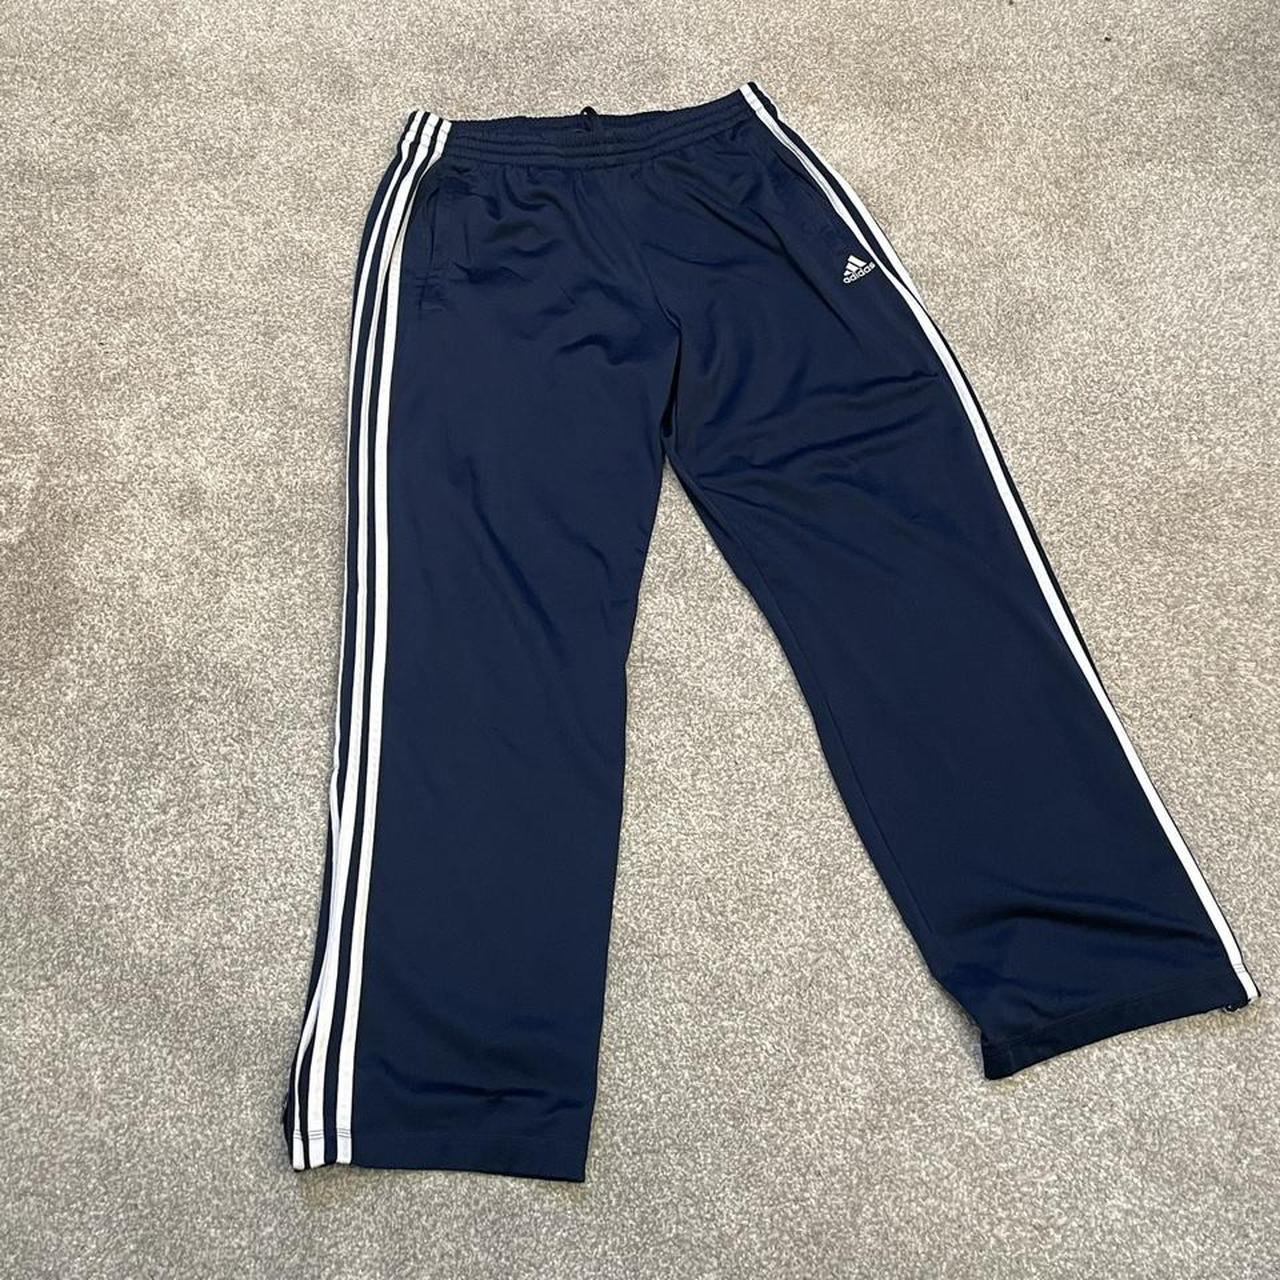 Adidas Men's Navy and Blue Joggers-tracksuits | Depop